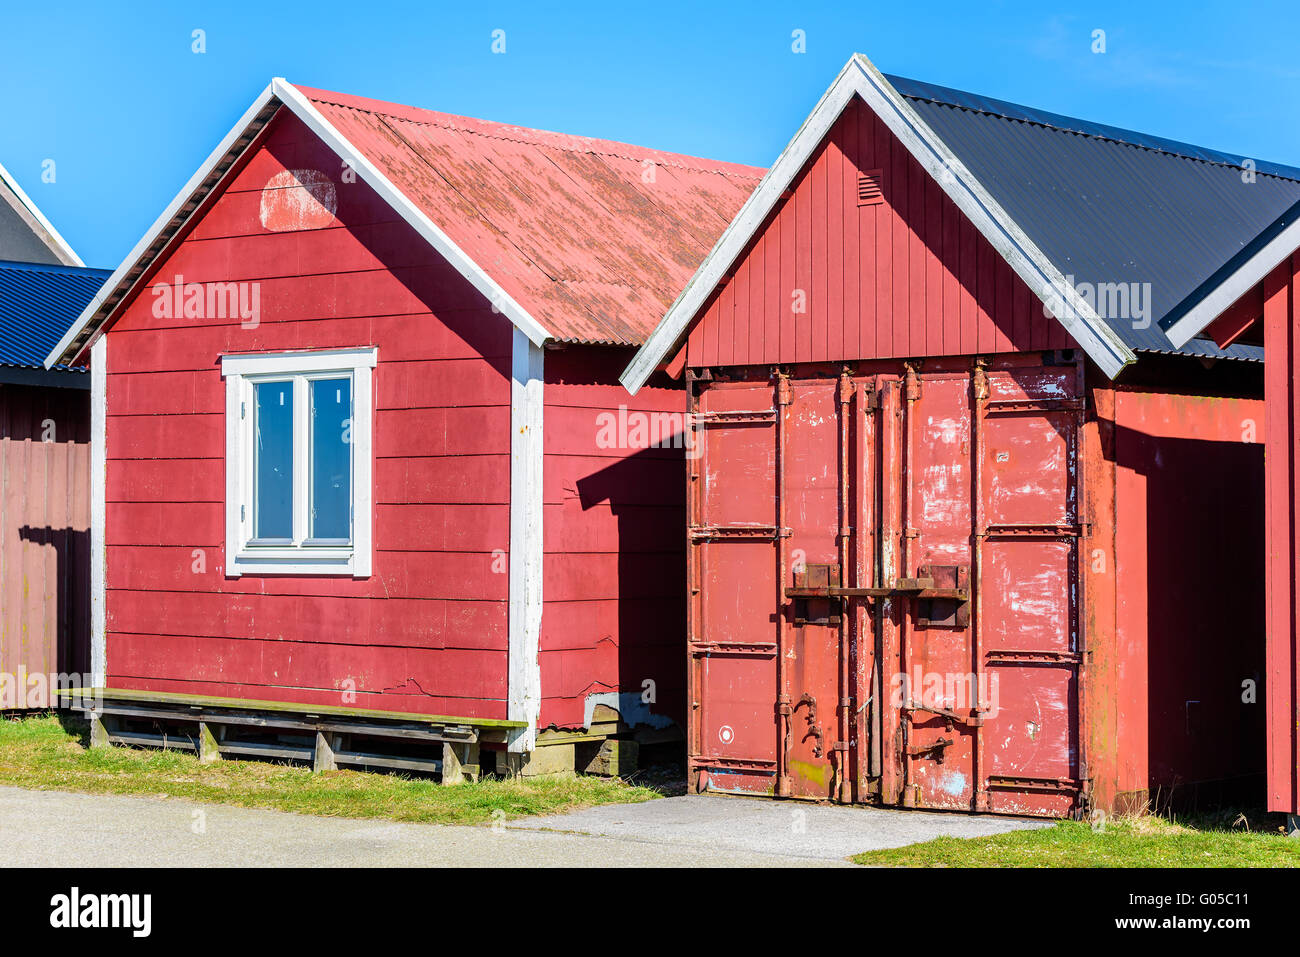 Falsterbo, Sweden - April 11, 2016: Two fishing cabins or tool sheds in the harbor. One is an up cycled cargo container with a r Stock Photo